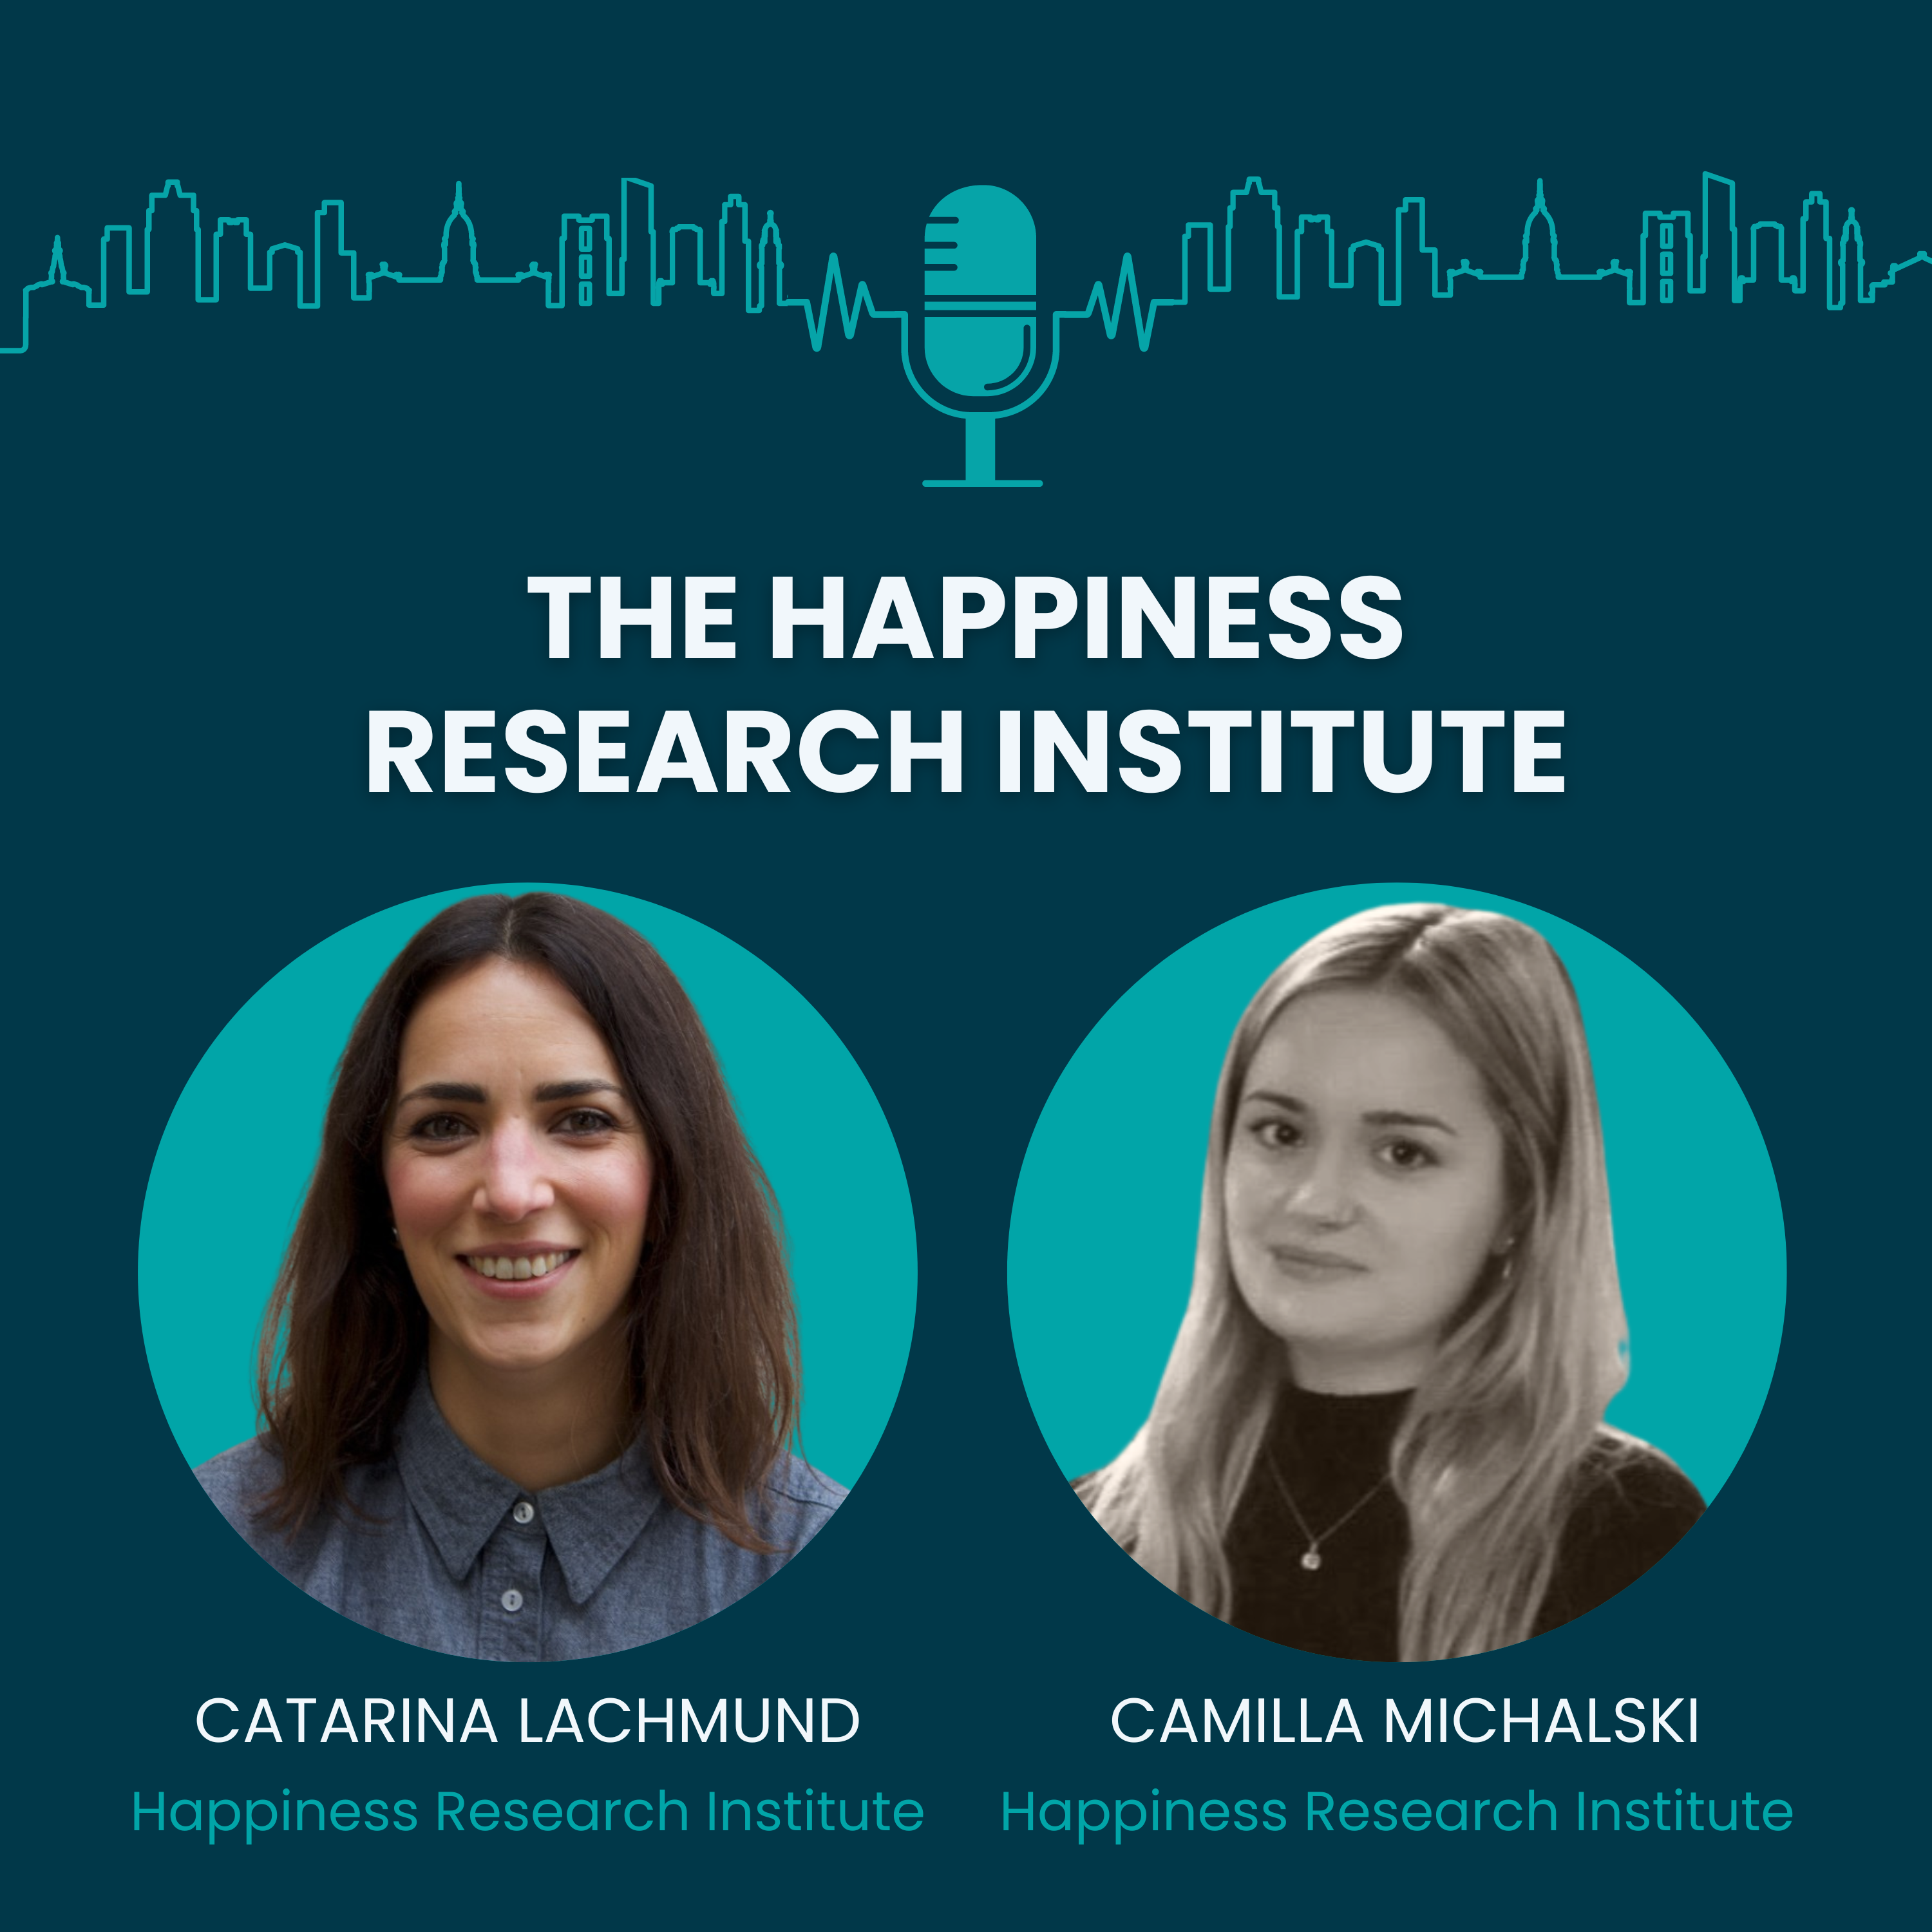 #29 The Happiness Research Institute: "A Human-Centered Approach" to Smart Cities